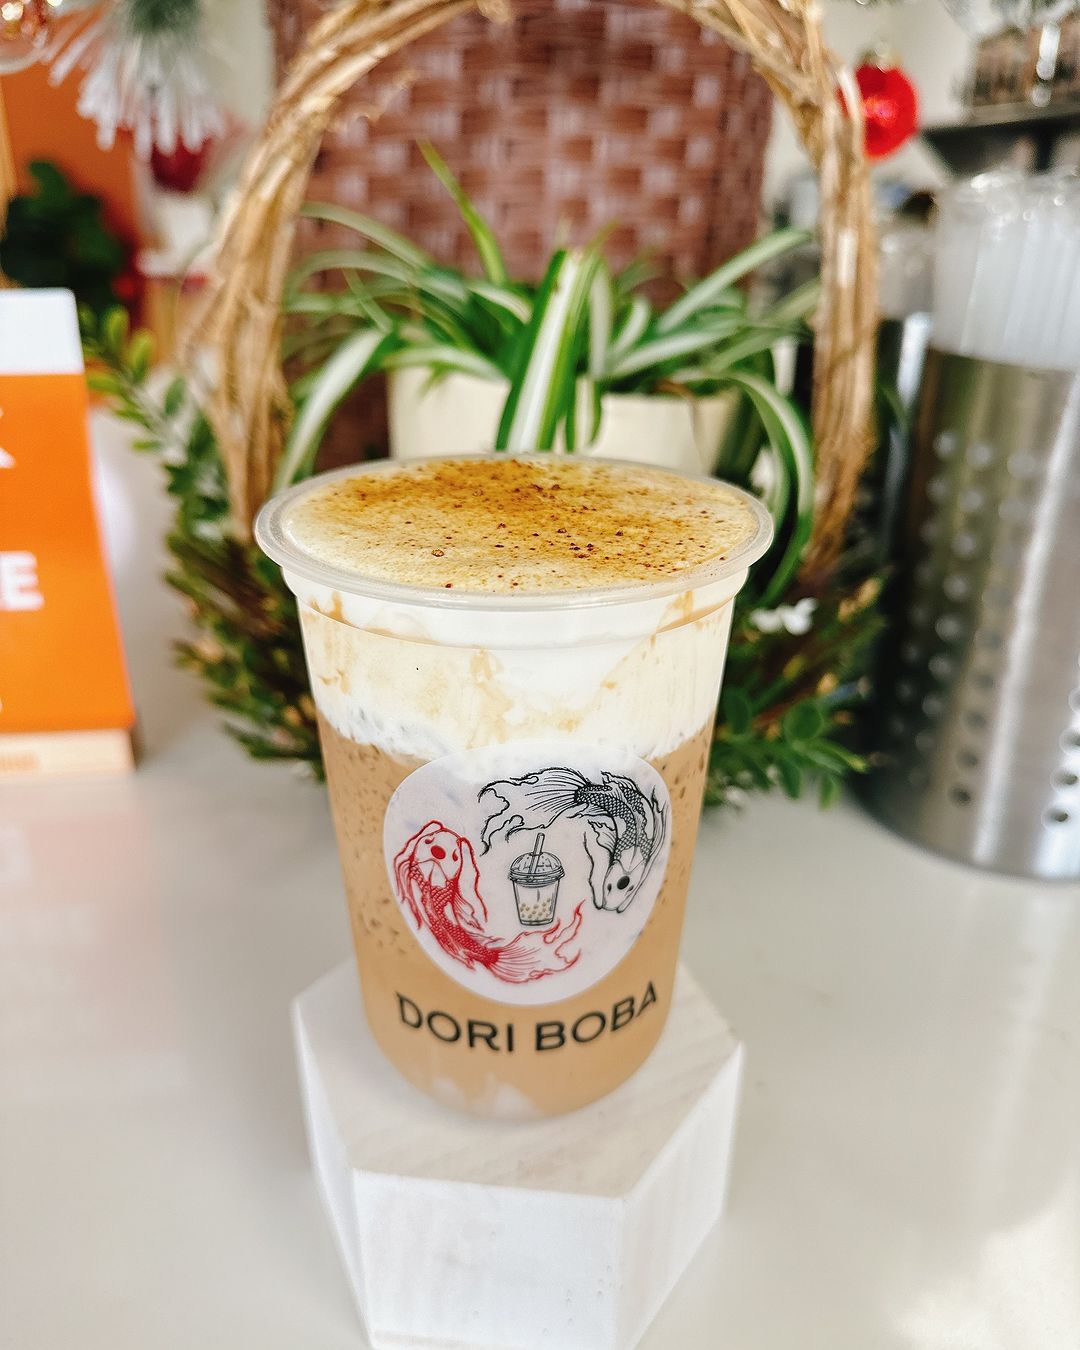 Dori Boba in Eastlake is the new kid on the block on this list